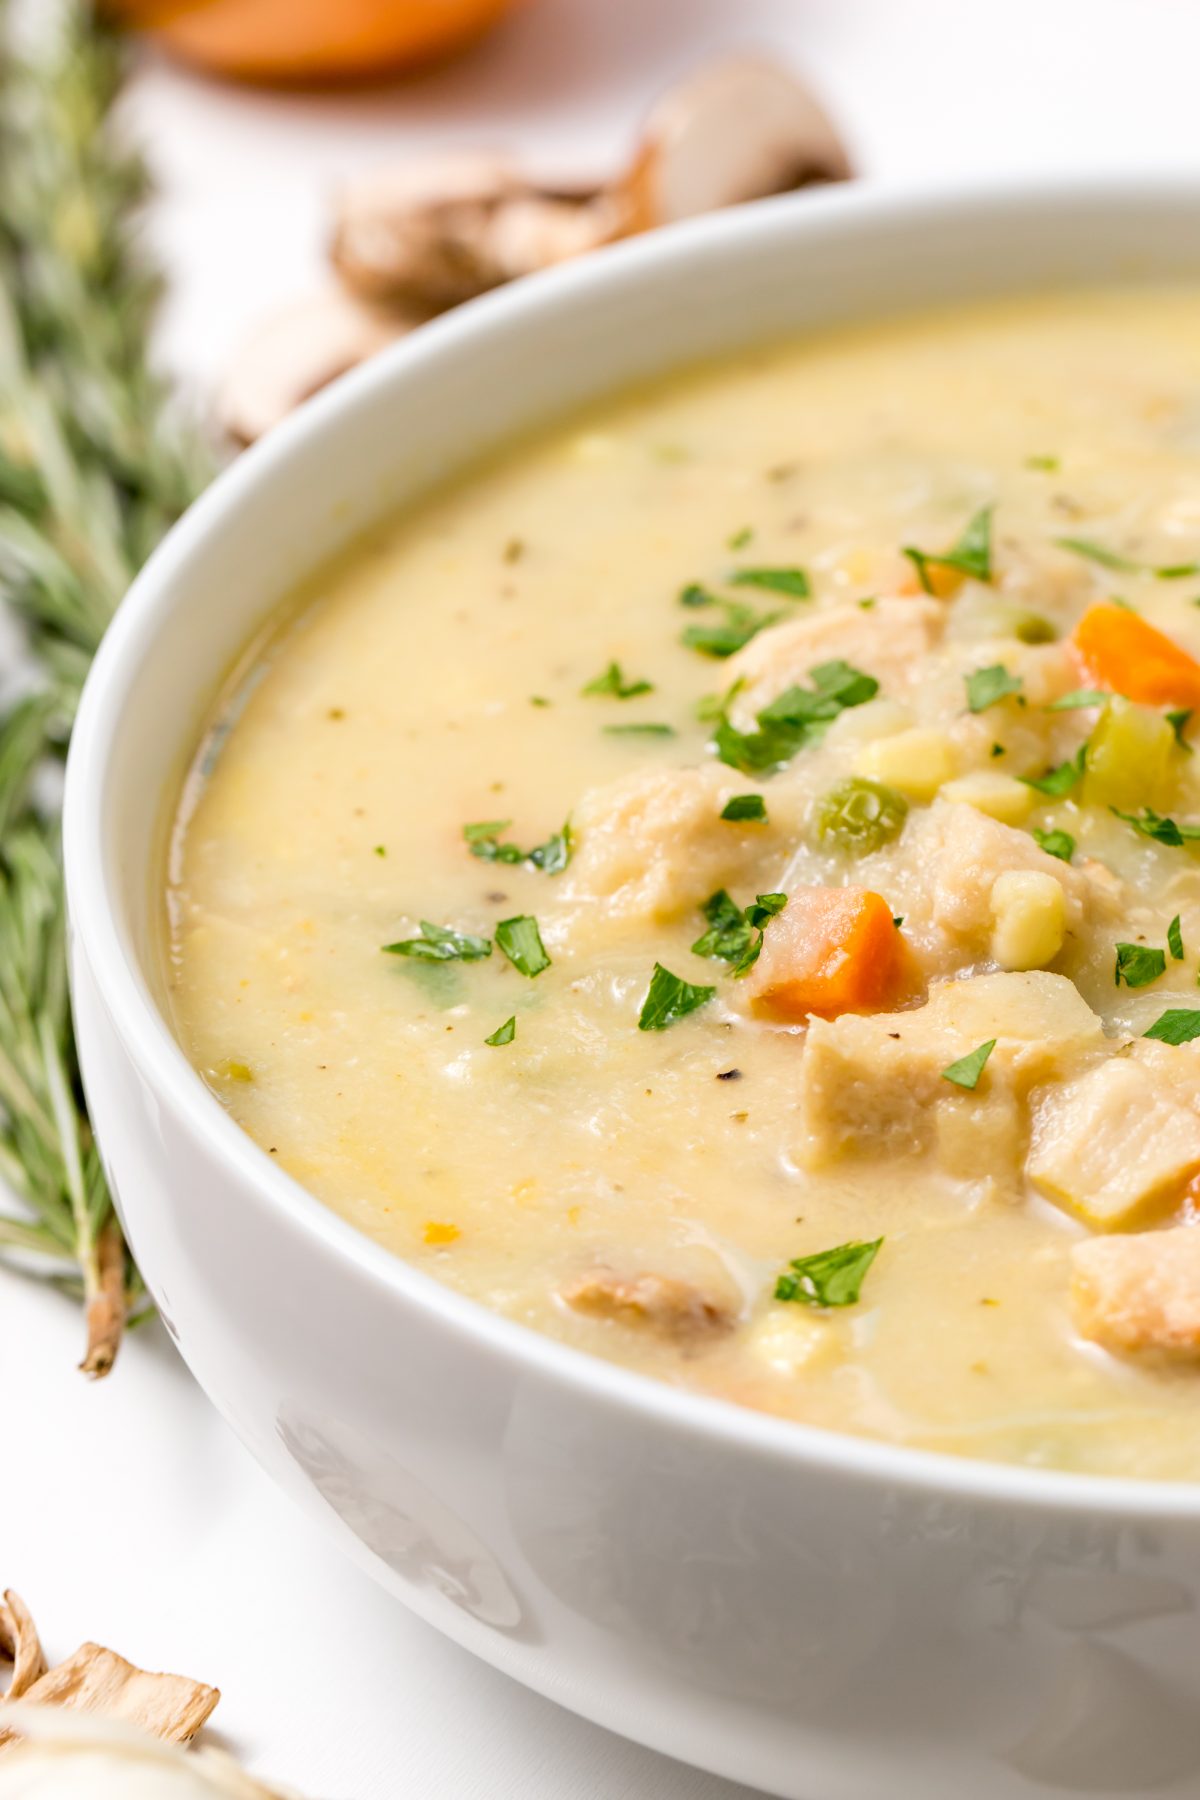 Delicious leftover turkey pot pie soup that will keep you toasty